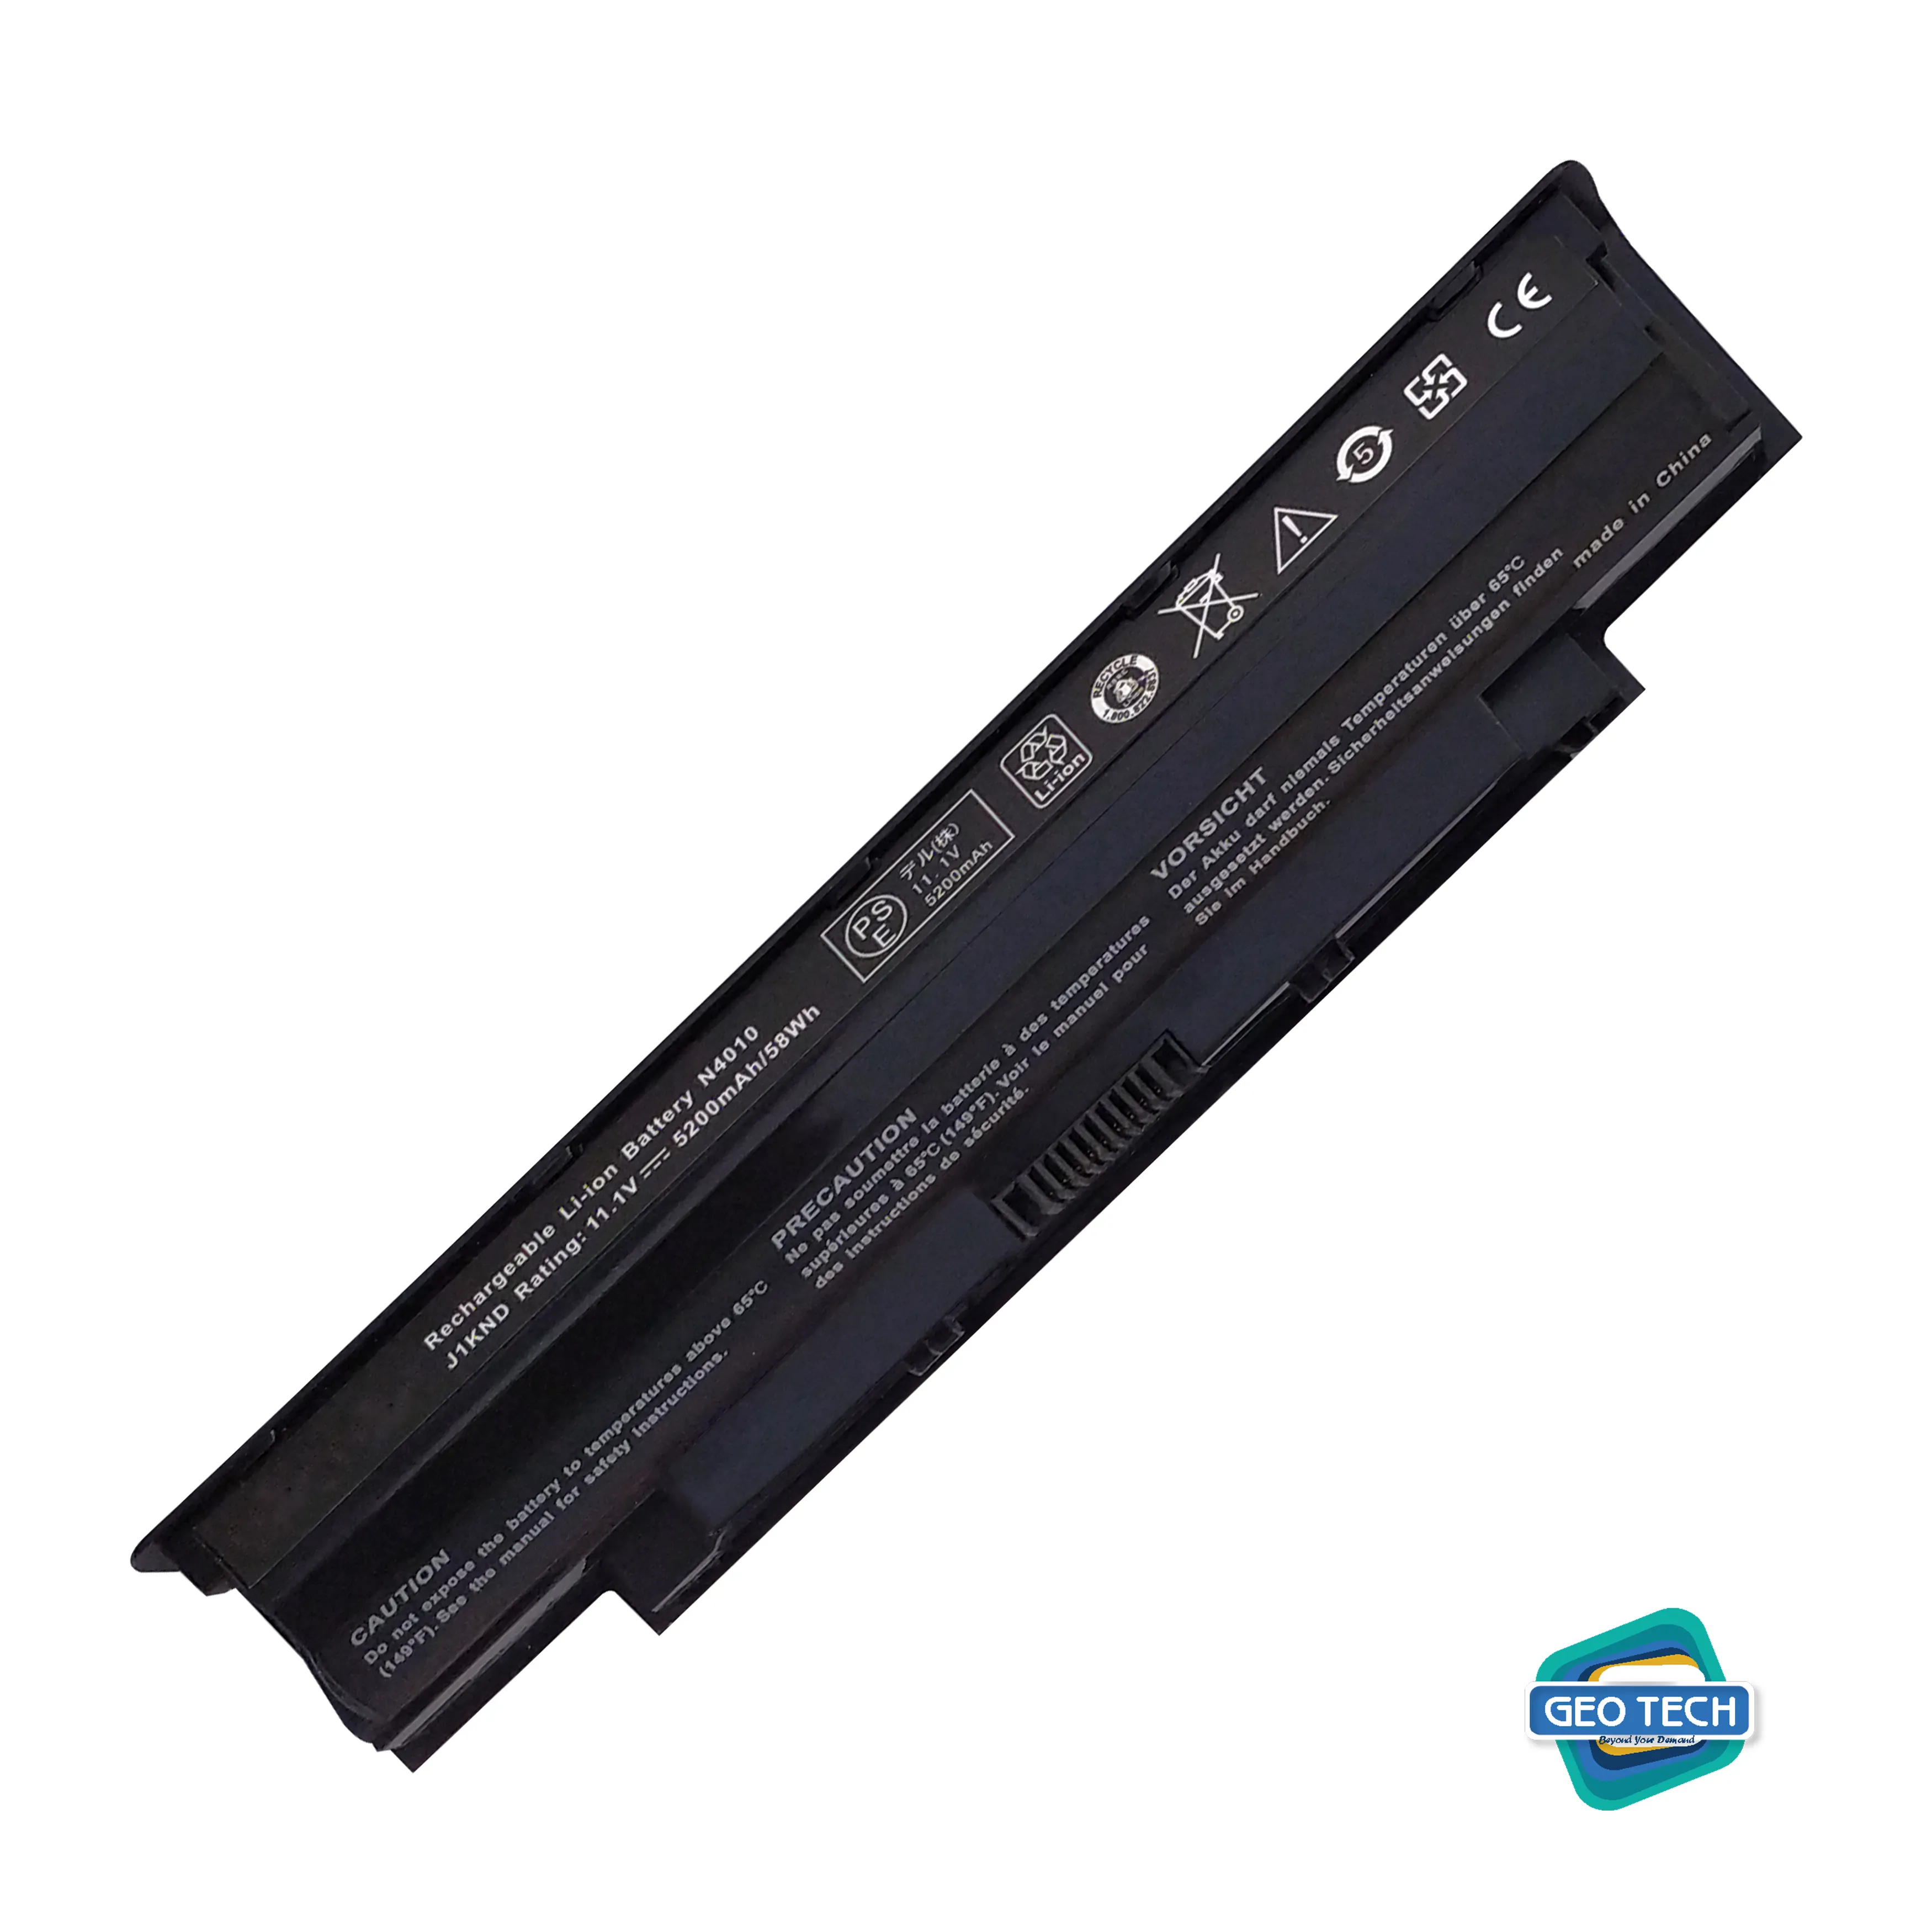 LAPTOP BATTERY FOR DELL INSPIRON  N4010/n5050, n5030, vostro 3450, vostro 1550 6cell.